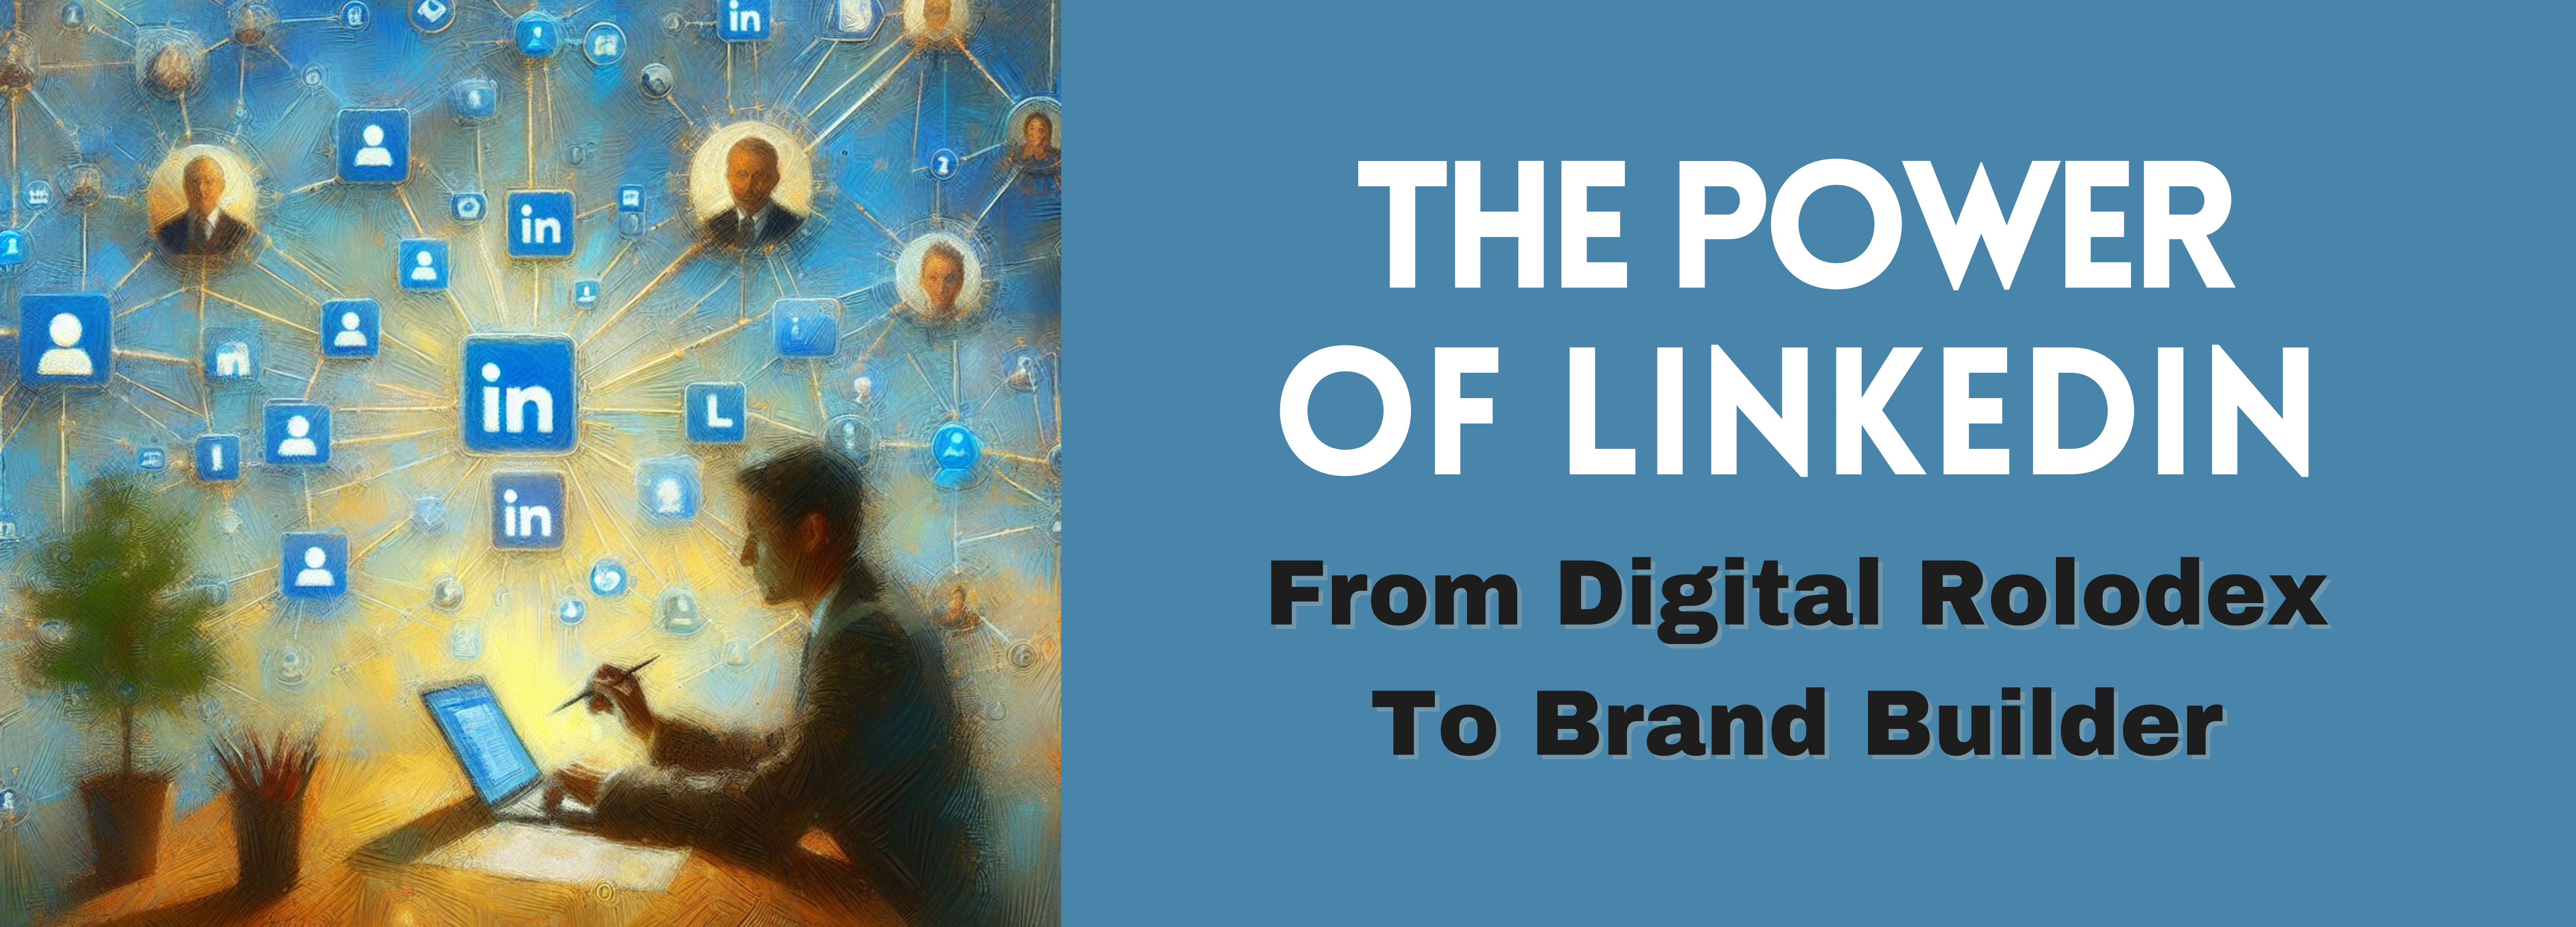 The Power Of LinkedIn: From Digital Rolodex To Brand Builder